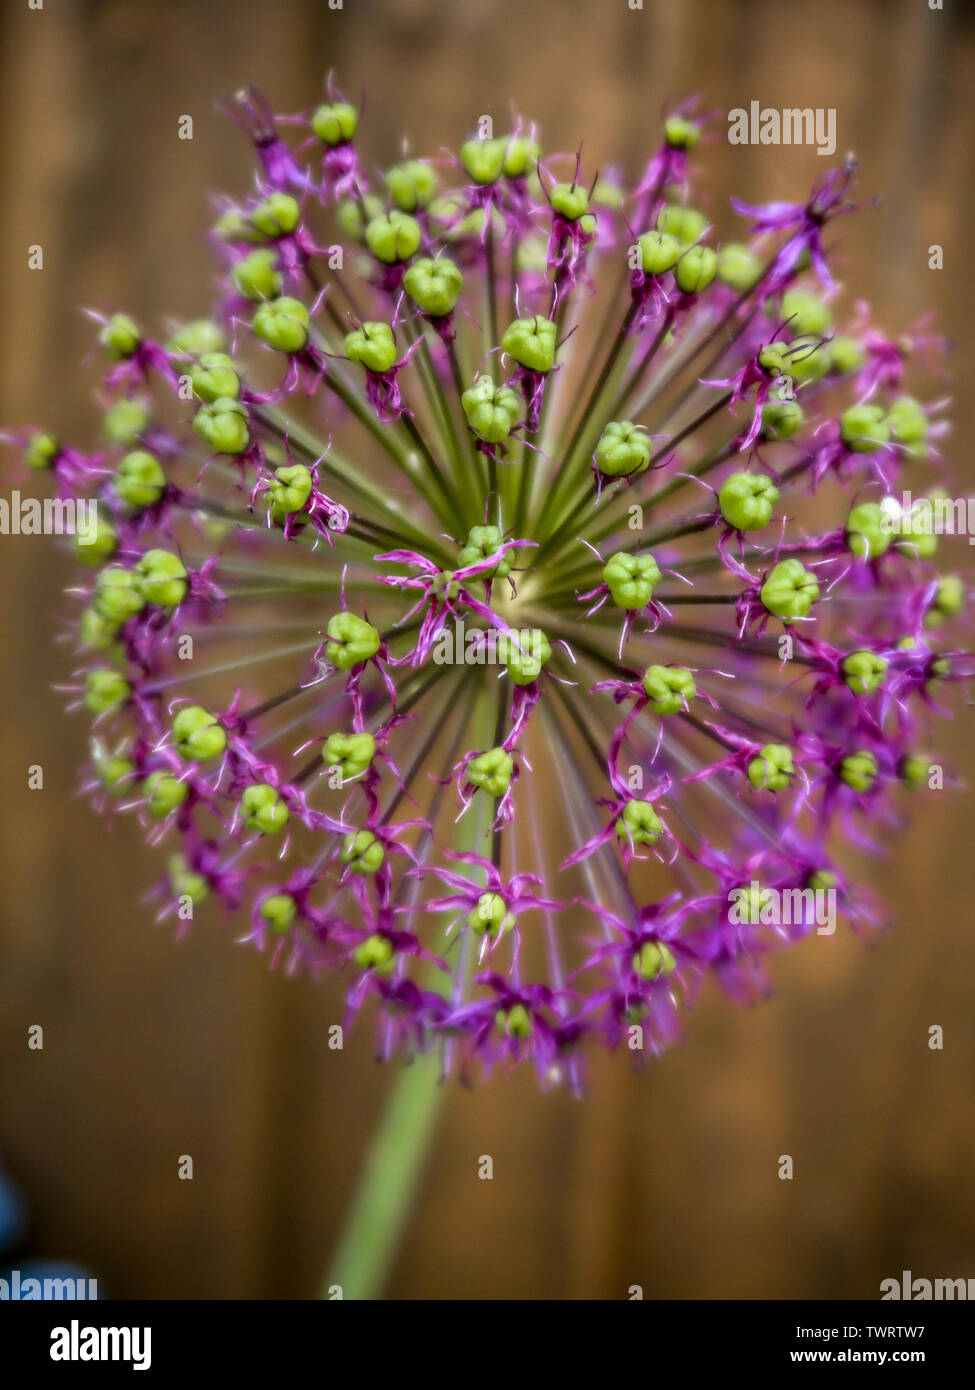 Alliums ornamental onions, bold and architectural, rounded heads, purple flowers, attractive seedheads, Allium stipitatum,  Mount Everest, Stock Photo